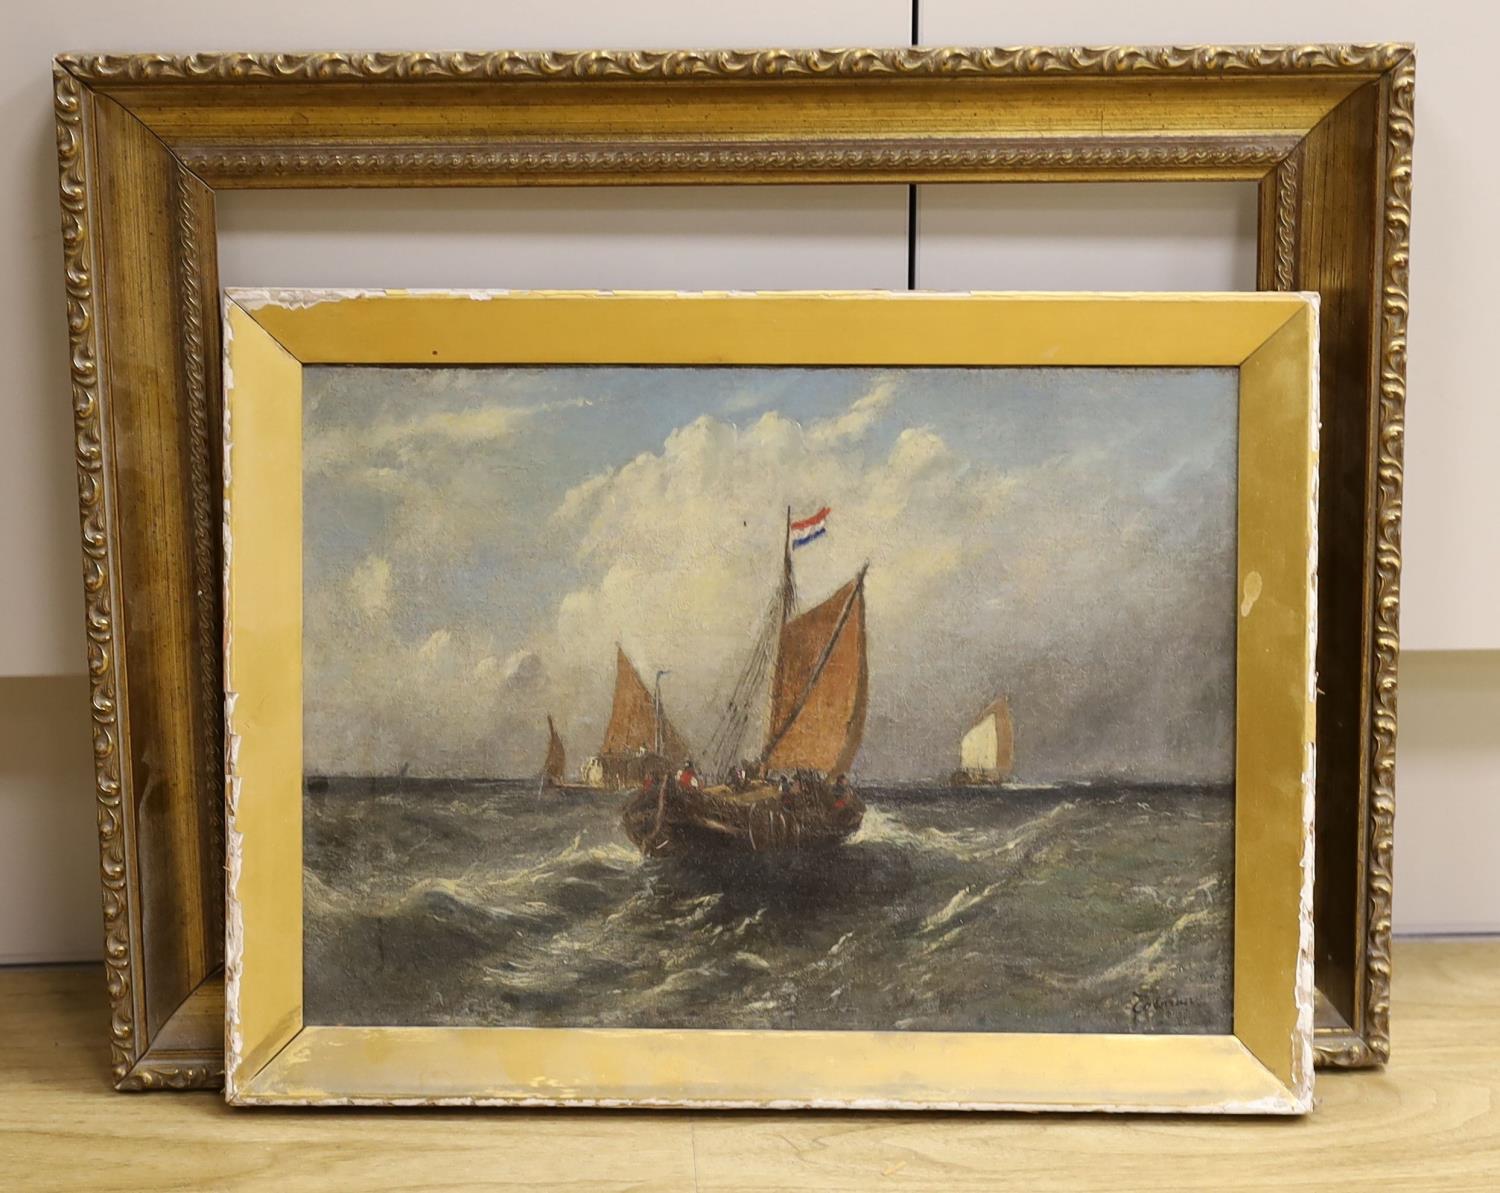 19th century English School, oil on canvas, Dutch fishing boat off the coast, indistinctly signed, - Image 2 of 2